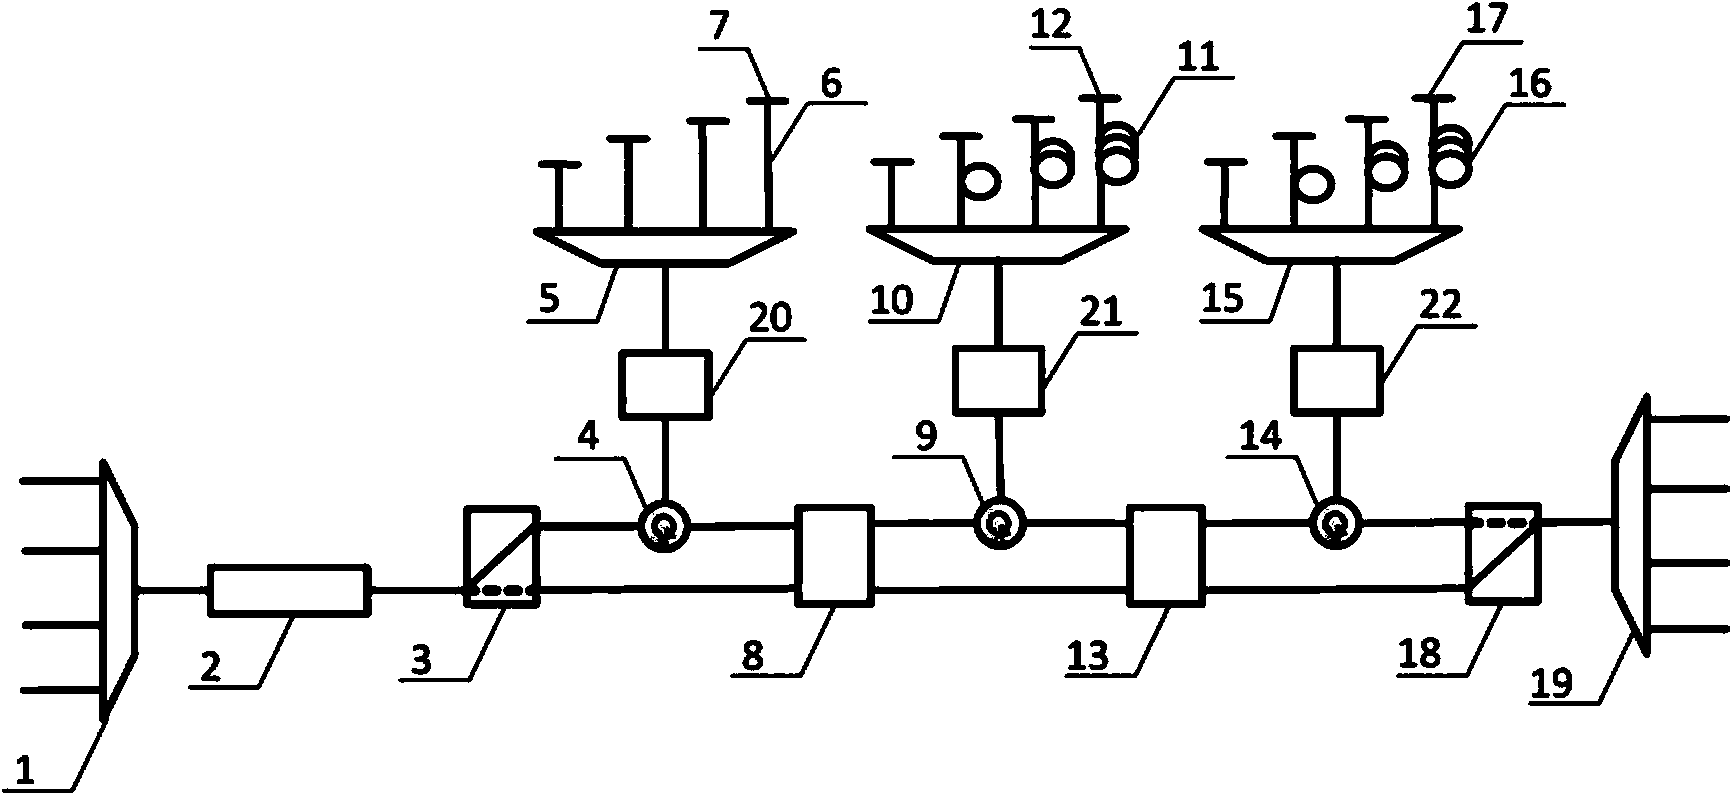 Programmable beam forming network on basis of optical wavelength division multiplexing technology